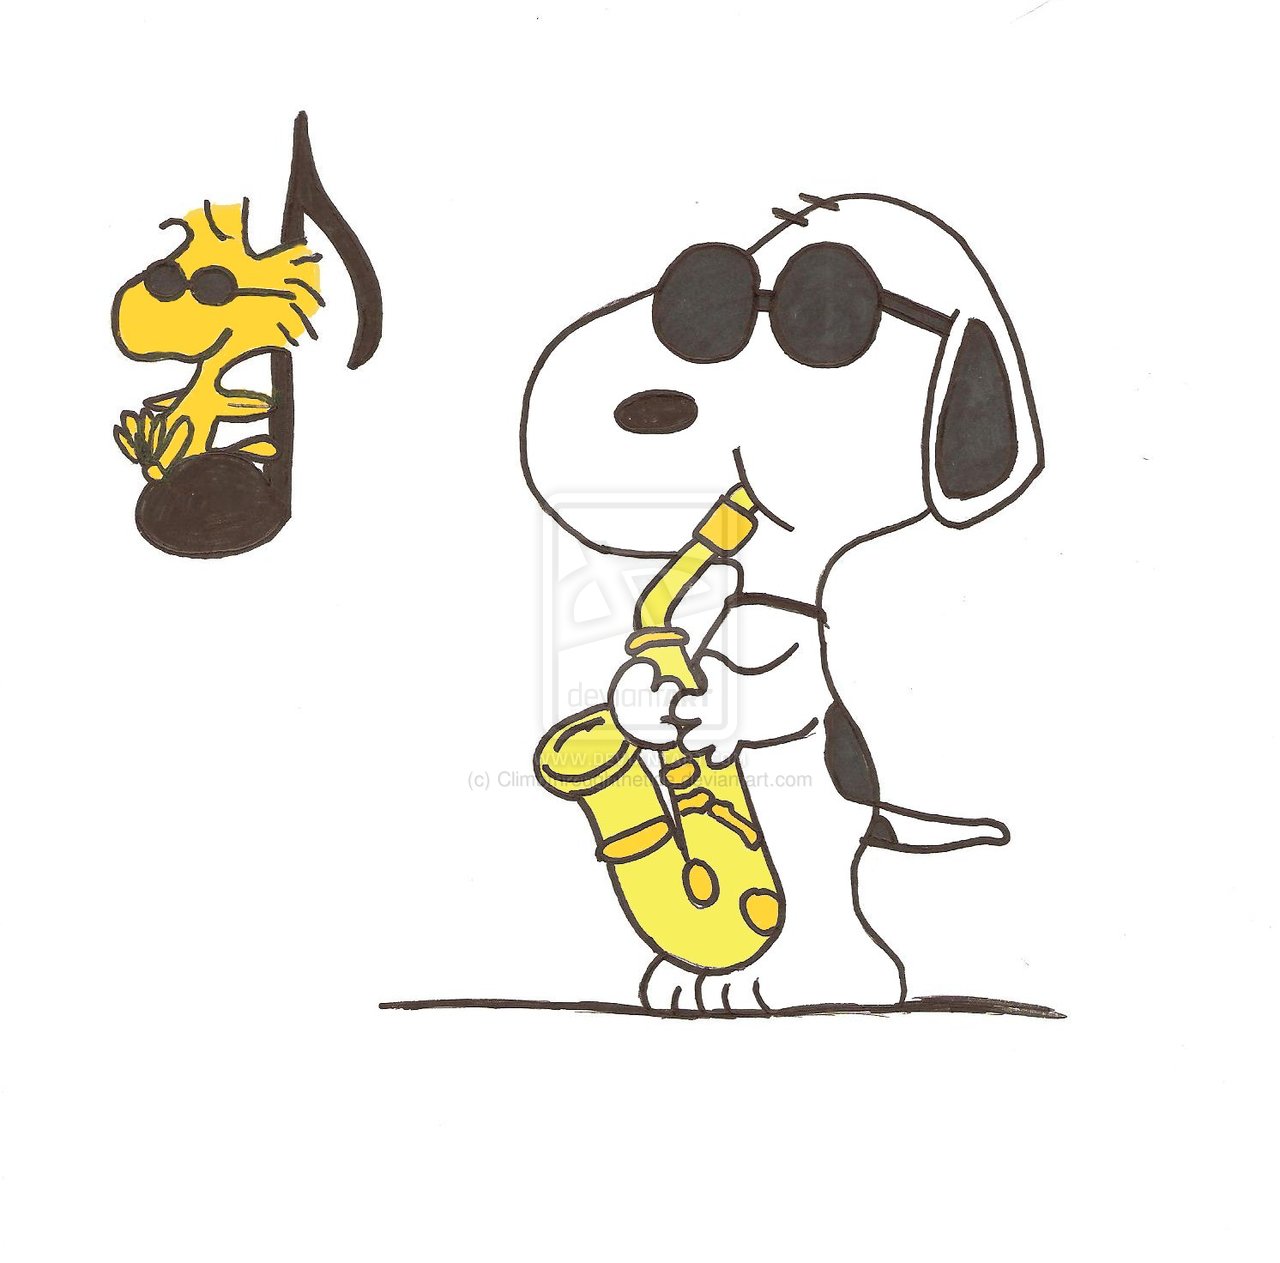 Snoopy And Woodstock By Climbthroughthetide